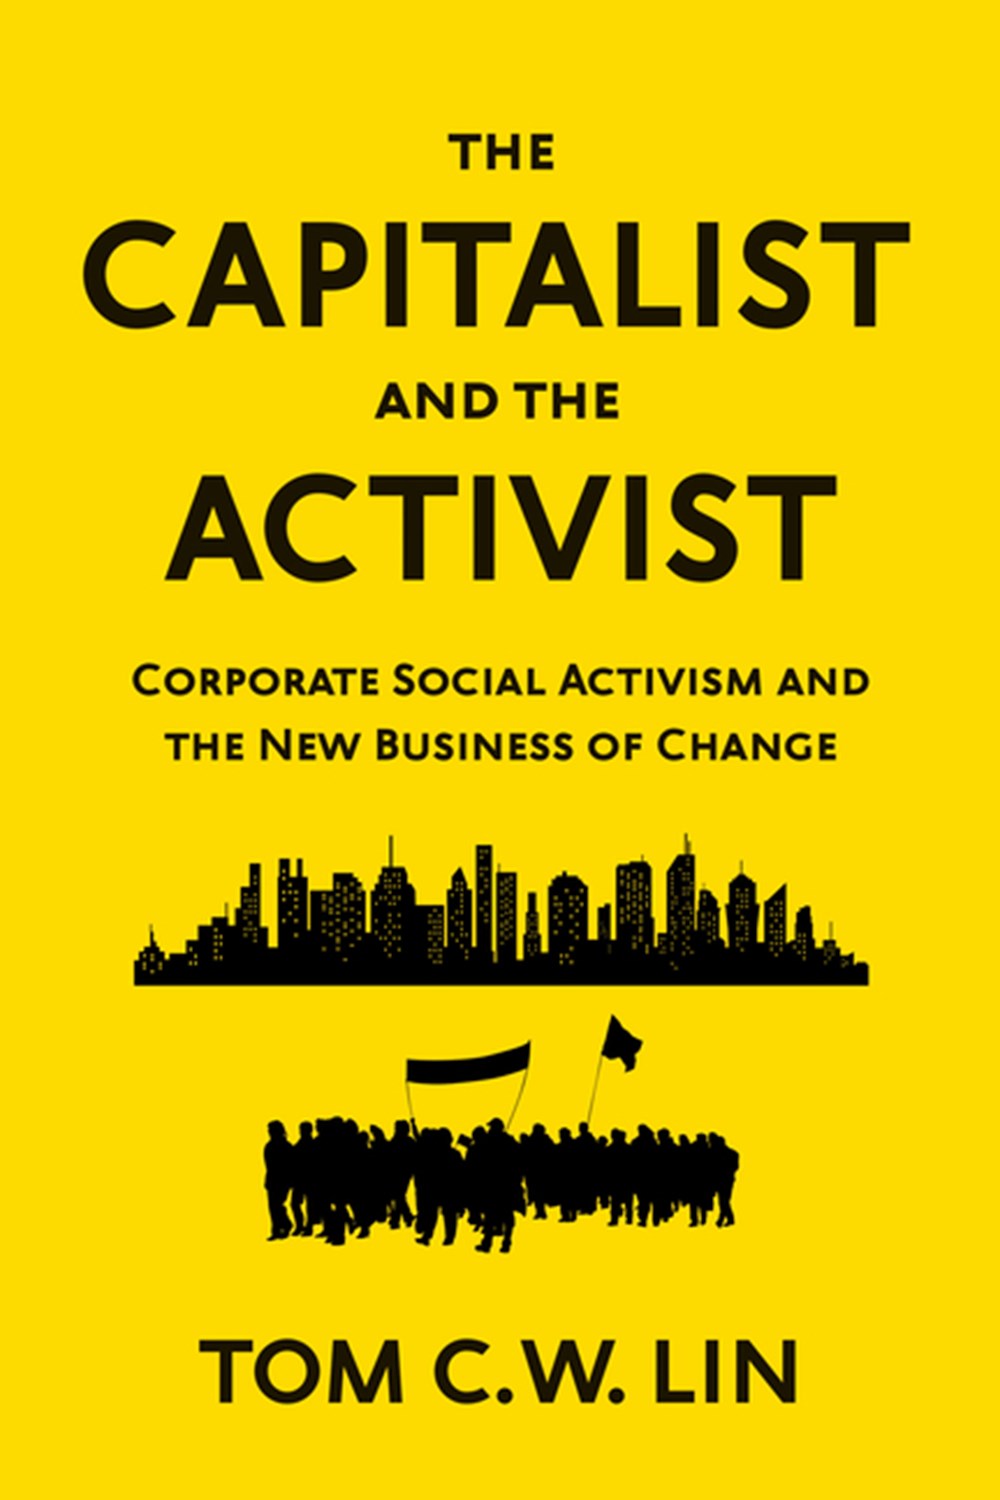 Capitalist and the Activist Corporate Social Activism and the New Business of Change